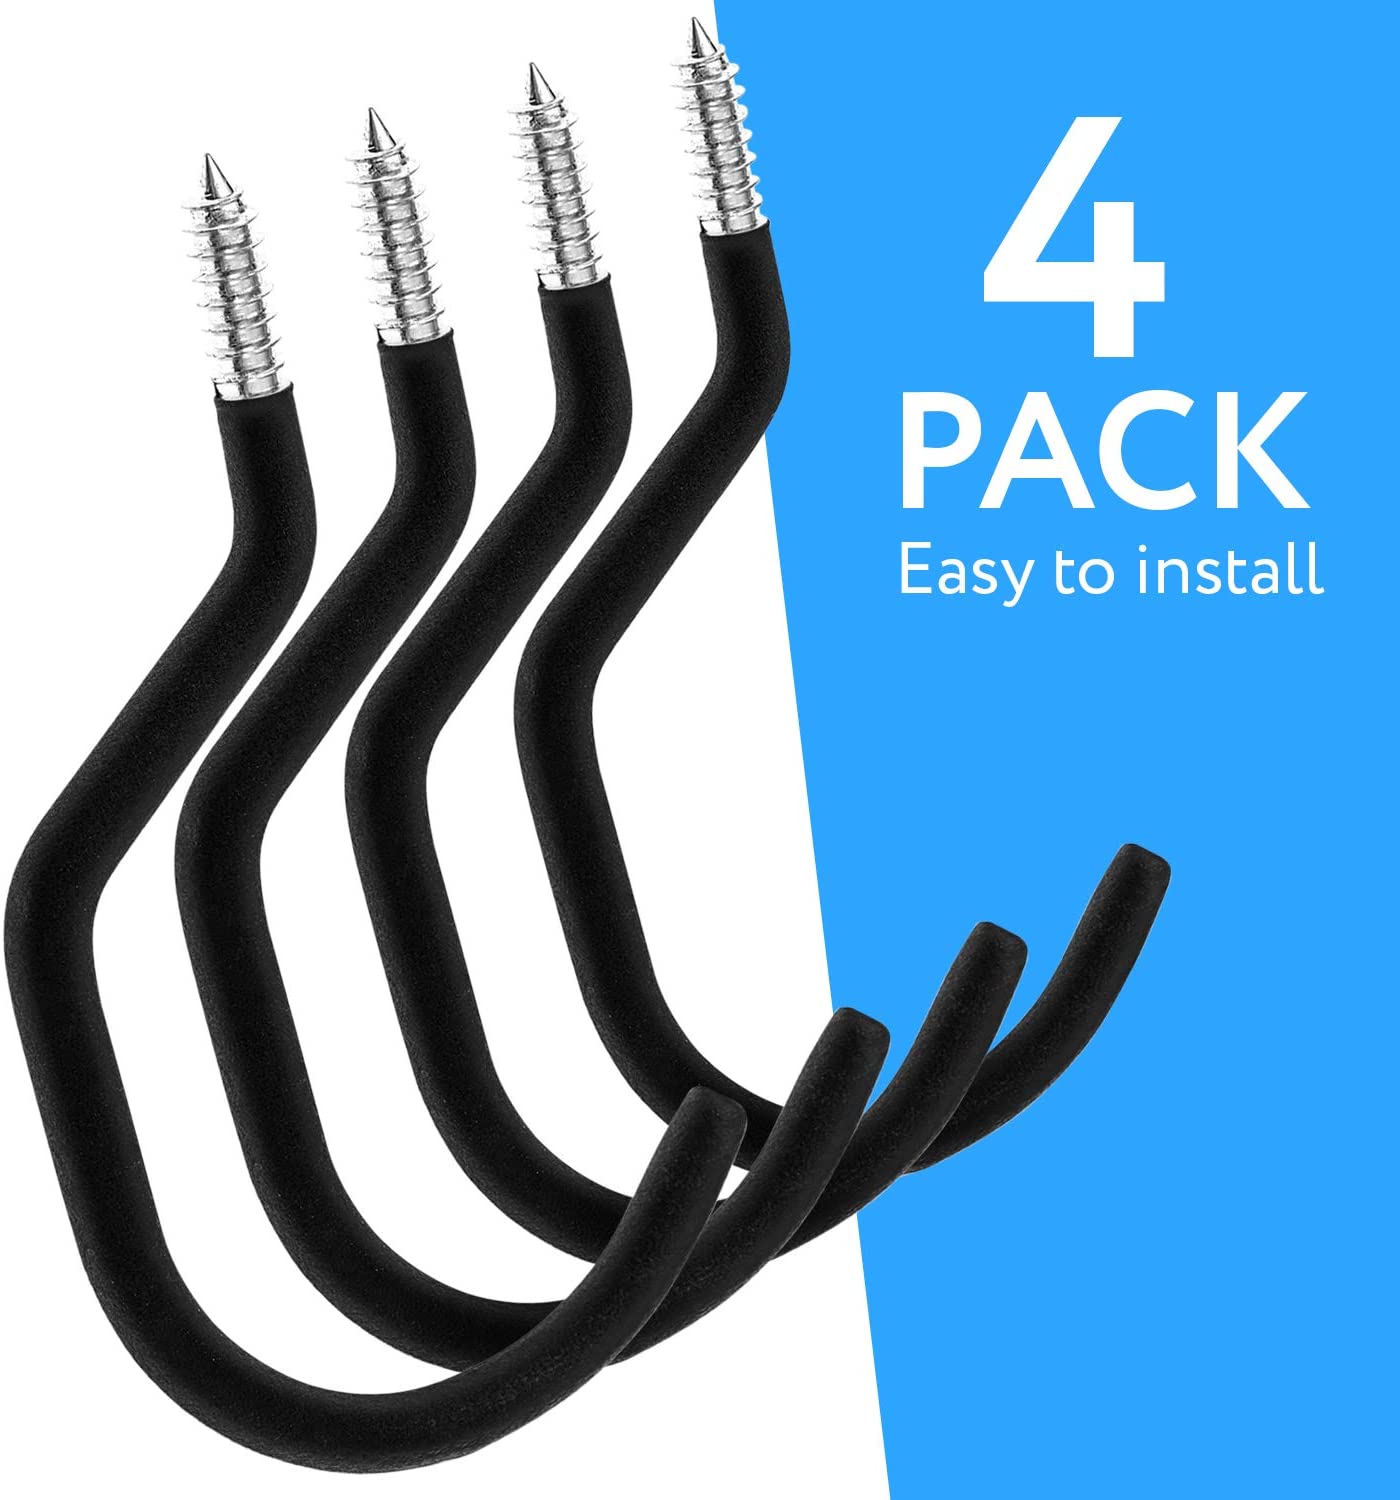 MCIGICM Heavy Duty Bike Hook: 4 Pack Small Size Perfect Hooks | Hangers for  Garage Ceiling and Wall Bicycle Storage and Hanging Screw in Bike Storage